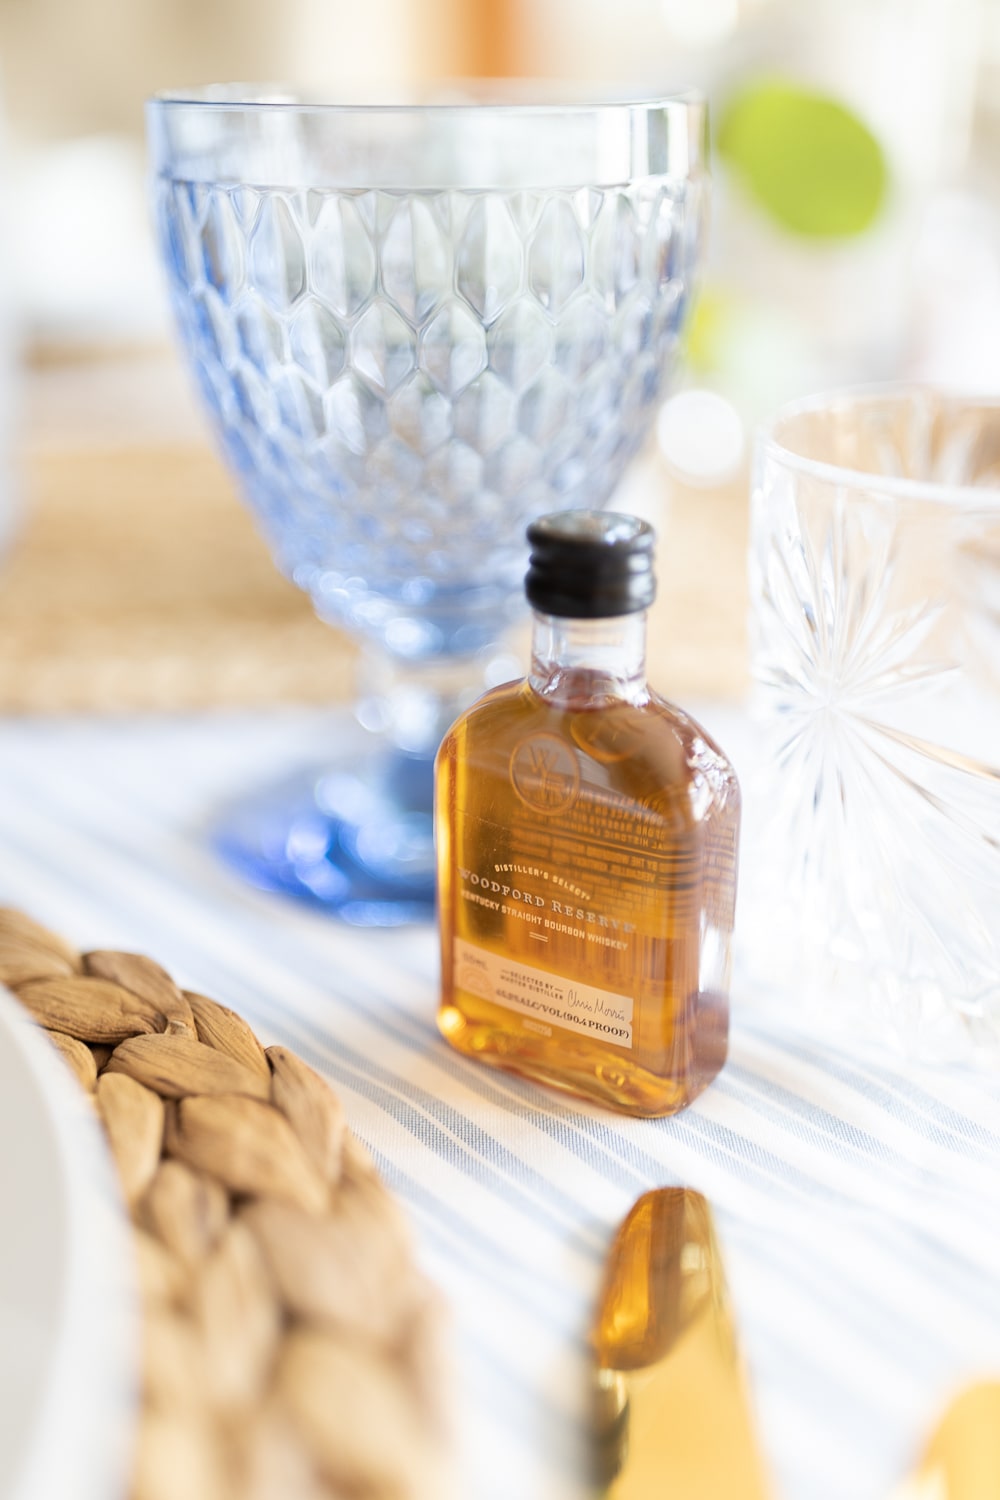 Blogger Stephanie Ziajka used mini Woodford Reserve bottles in her Father's Day tablescape on Diary of a Debutante